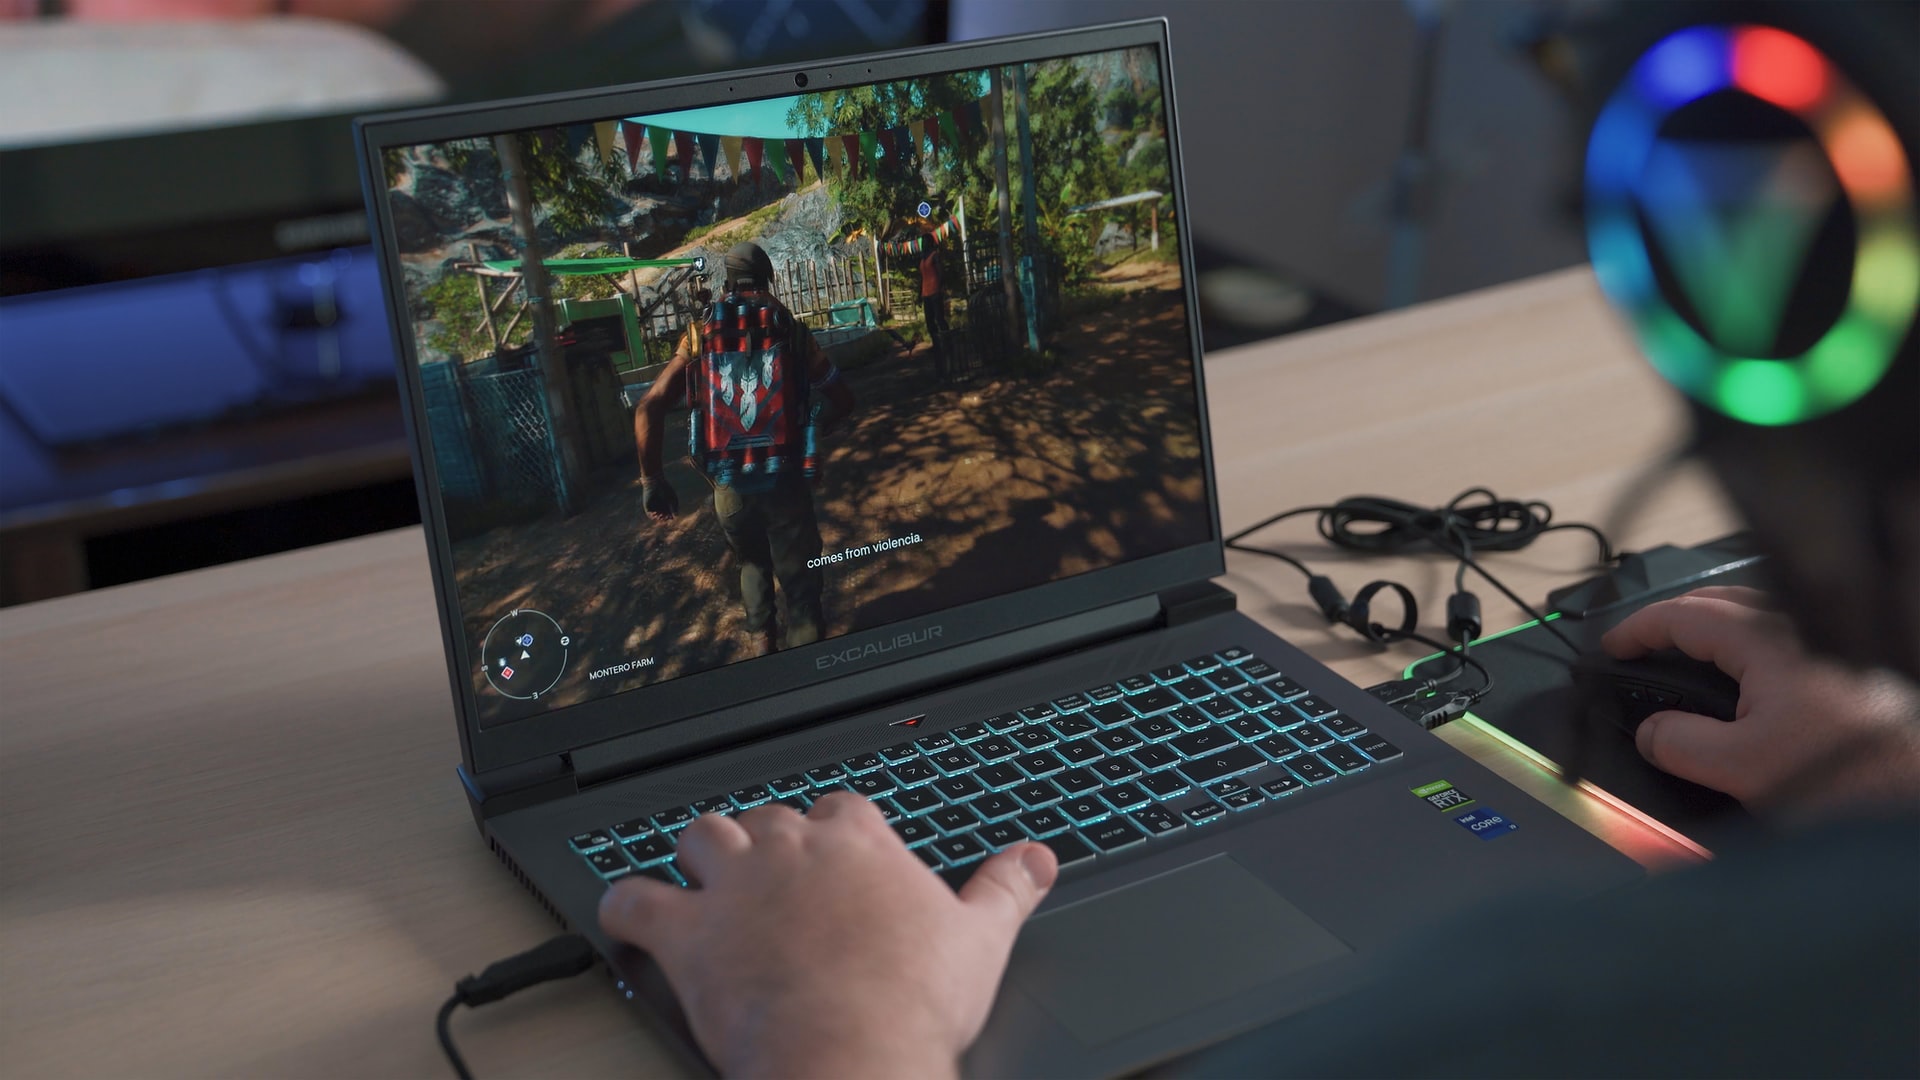 How Long Does a Gaming Laptop Last?